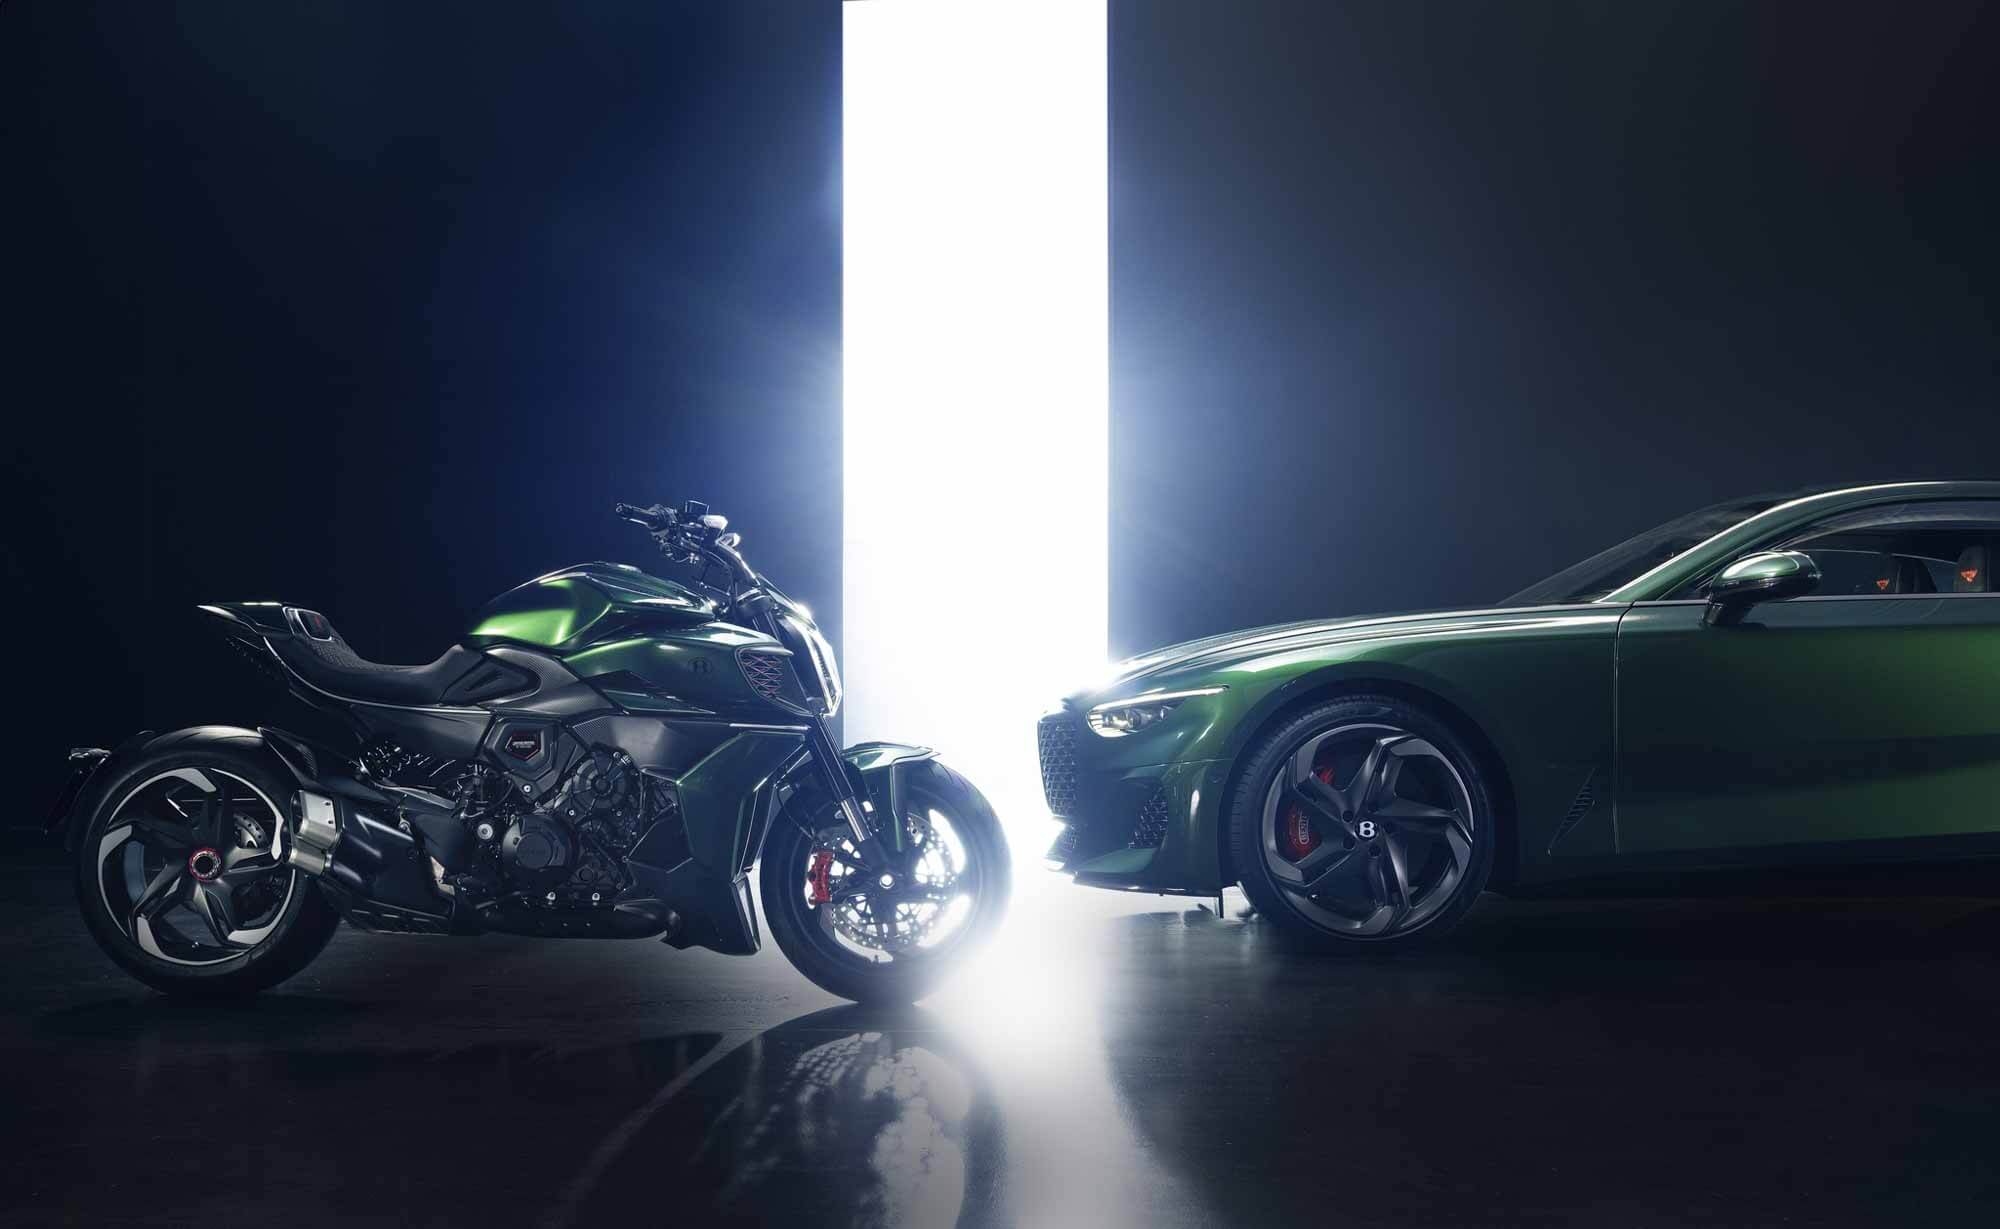 Ducati has released an exclusive motorcycle specifically for the Bentley brand